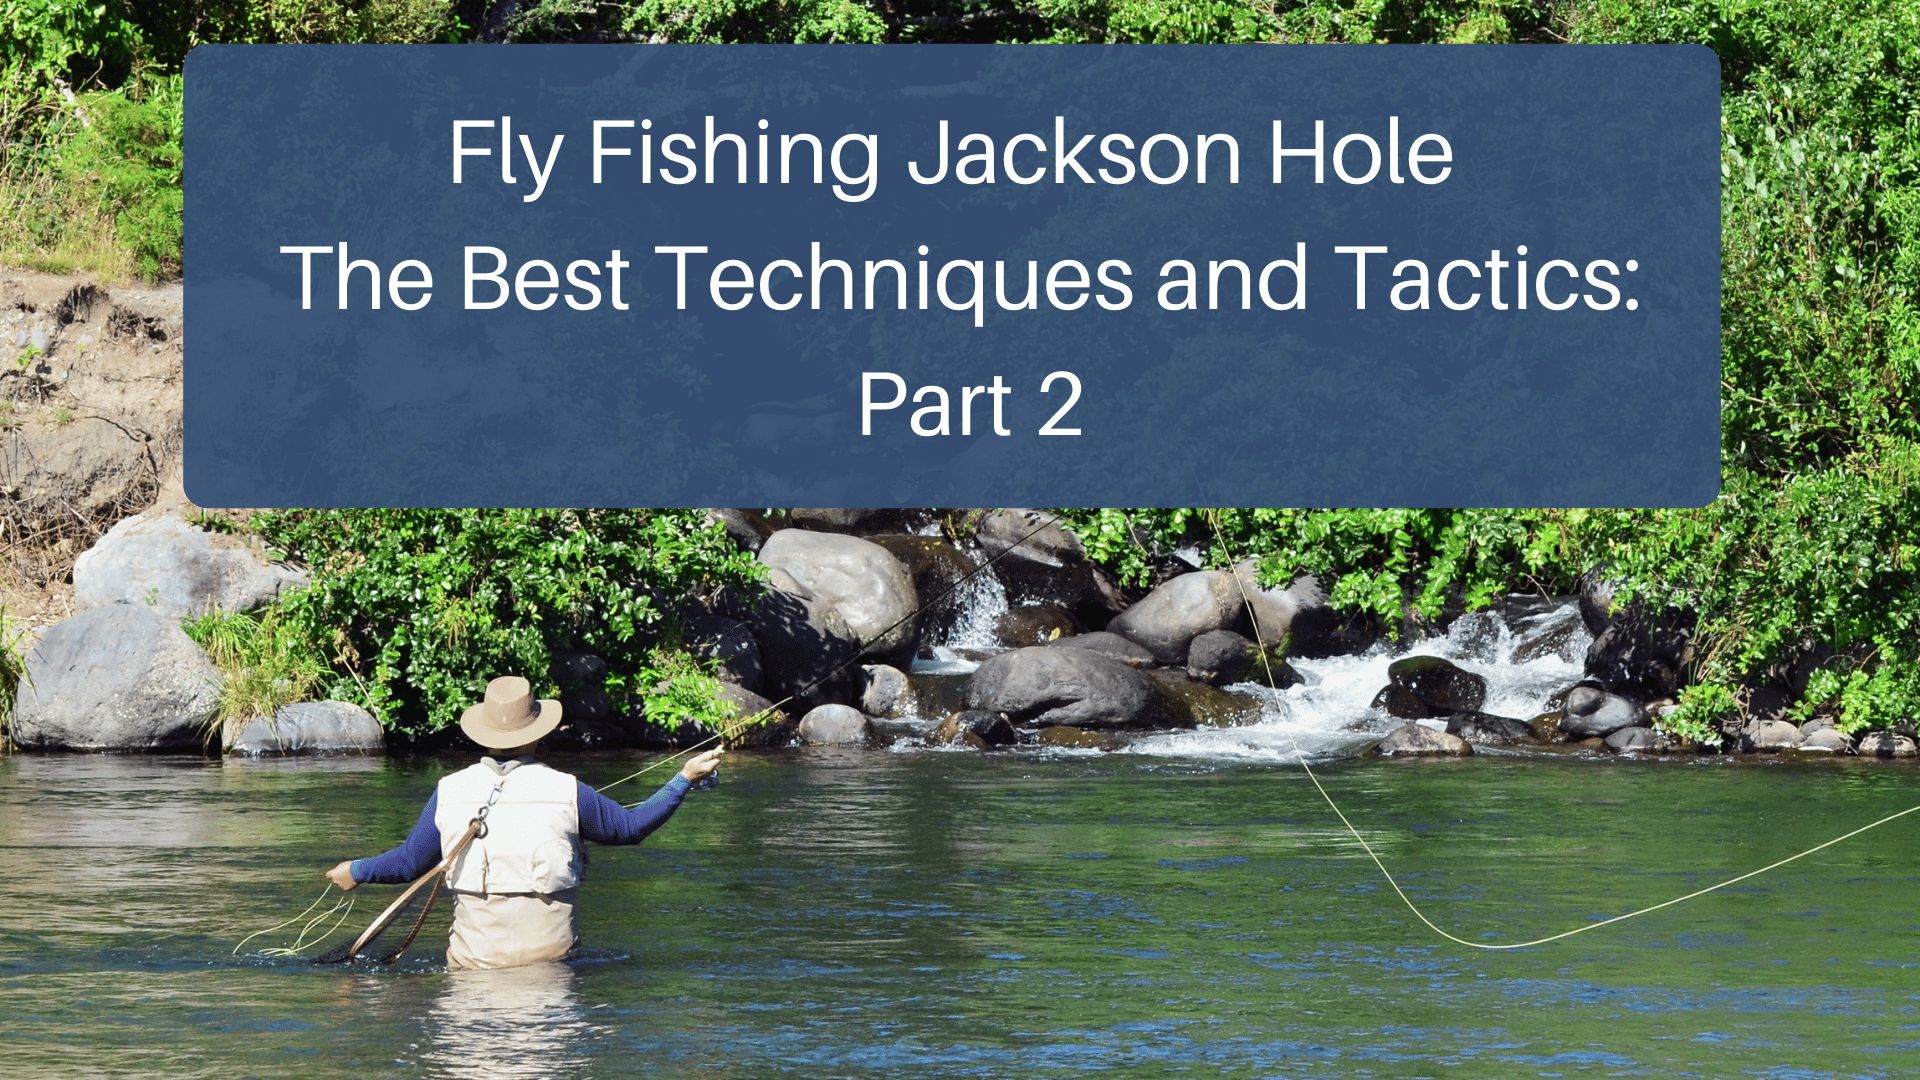 Fly Fishing Jackson Hole The Best Techniques and Tactics: Part 2